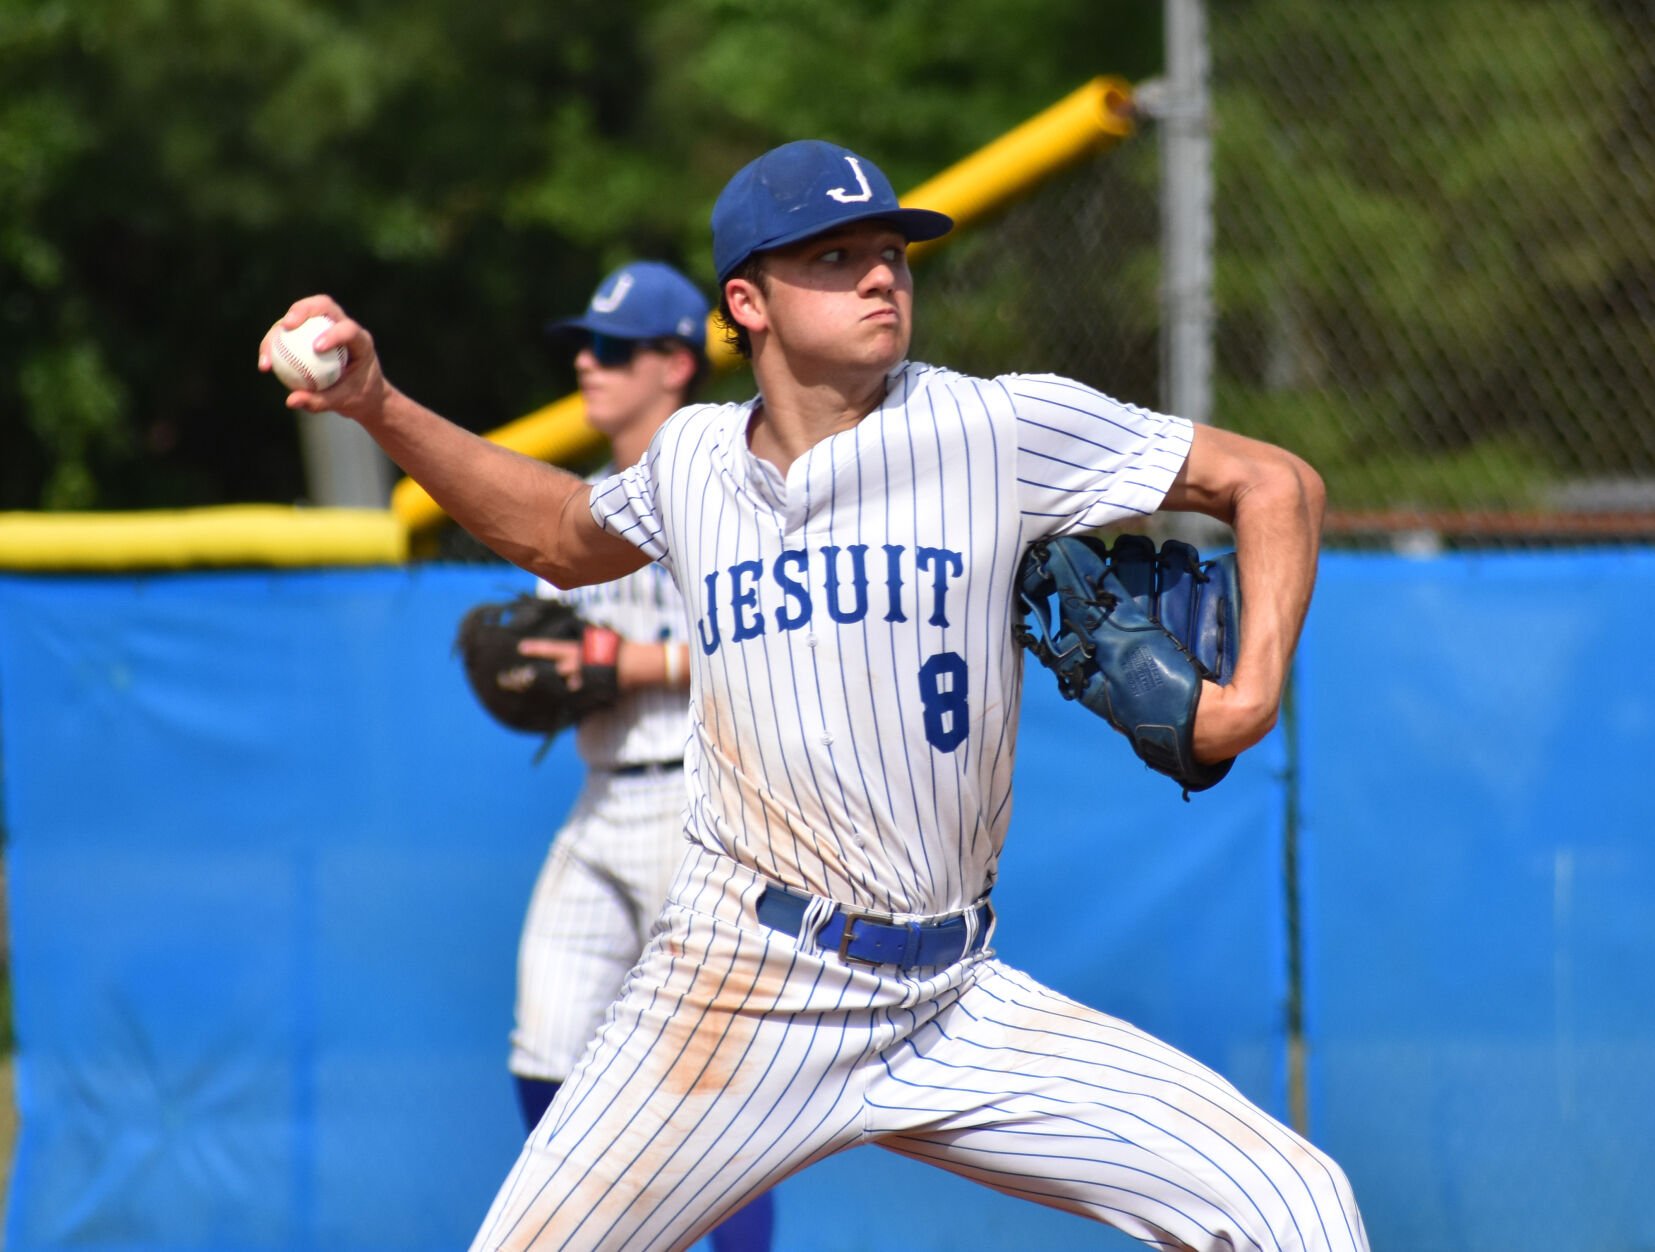 A big third inning was the difference in the first game of a playoff series between Jesuit and St. Paul’s